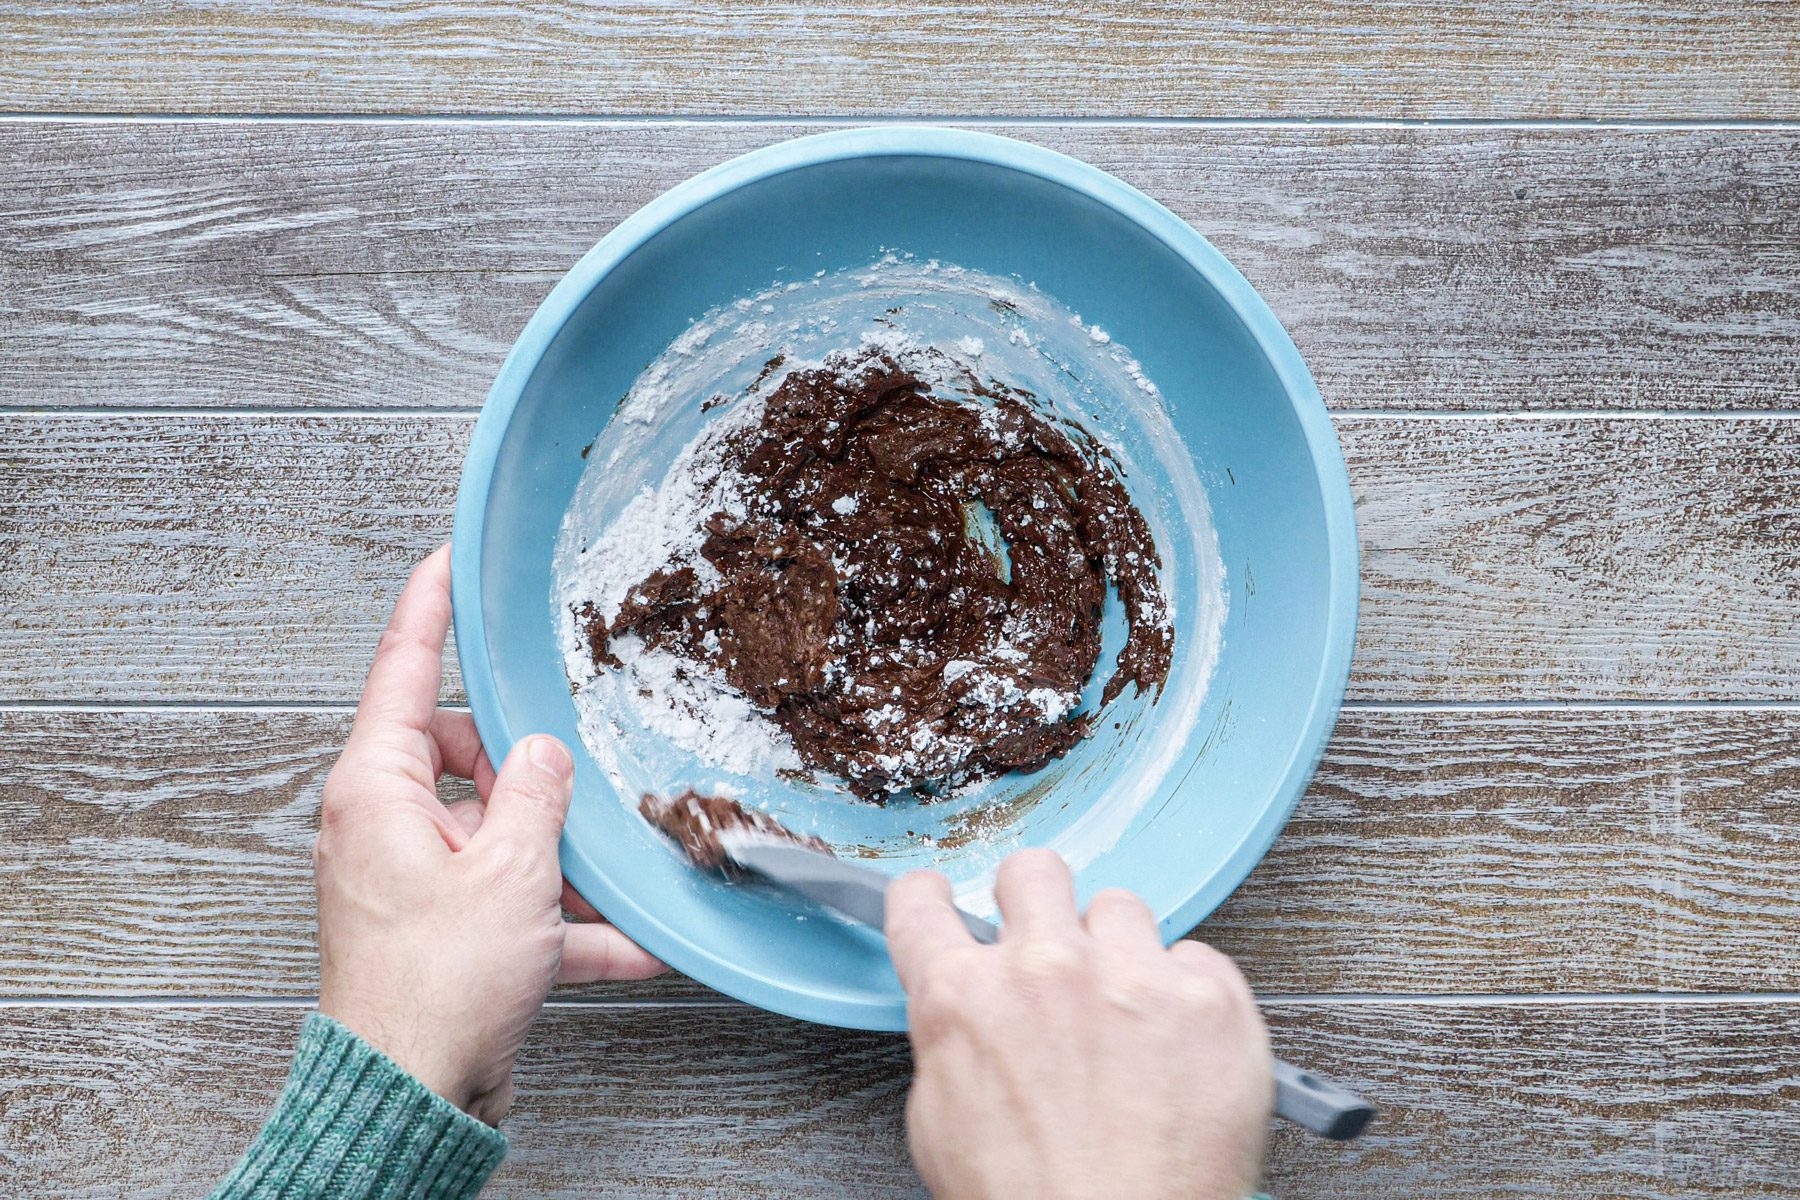 A person mixing chocolate and flour in a bowl